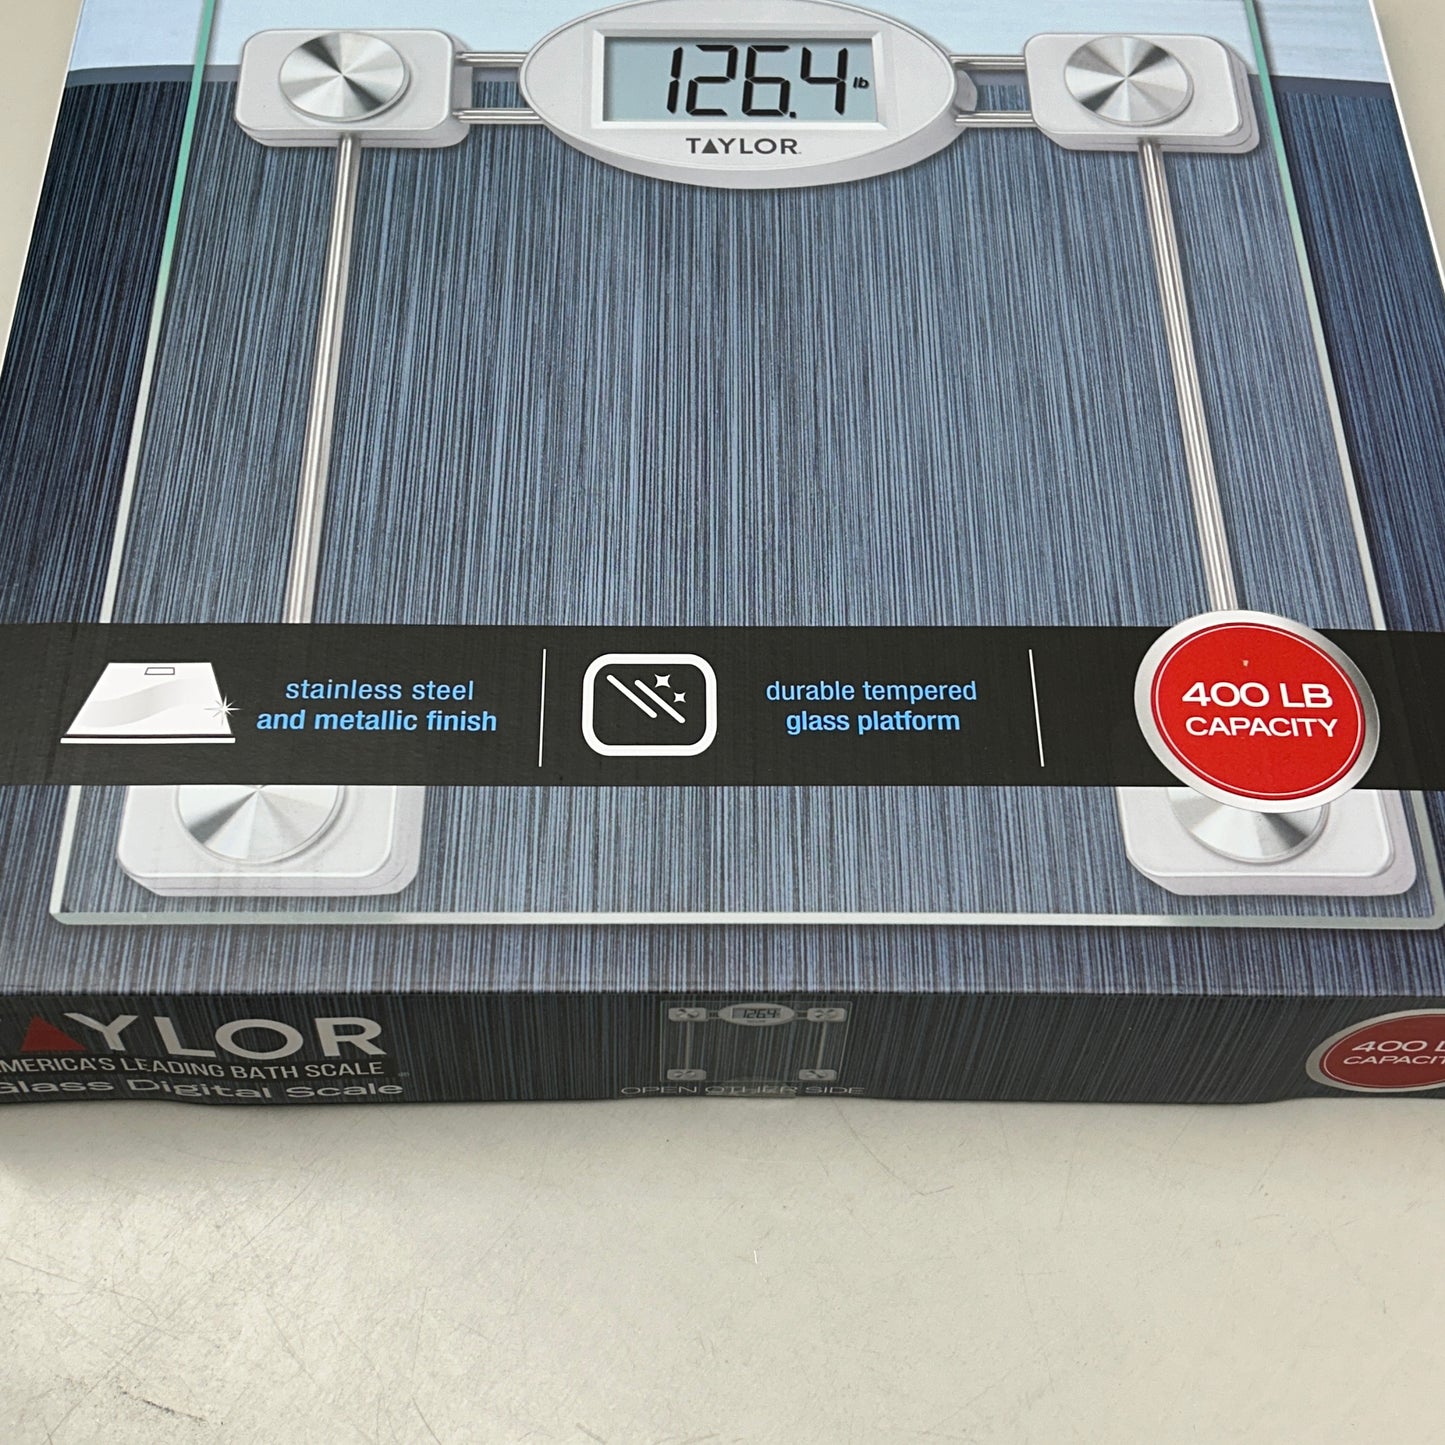 TAYLOR Digital Bathroom Scale with Stainless Steel Frame 75274192 (New)